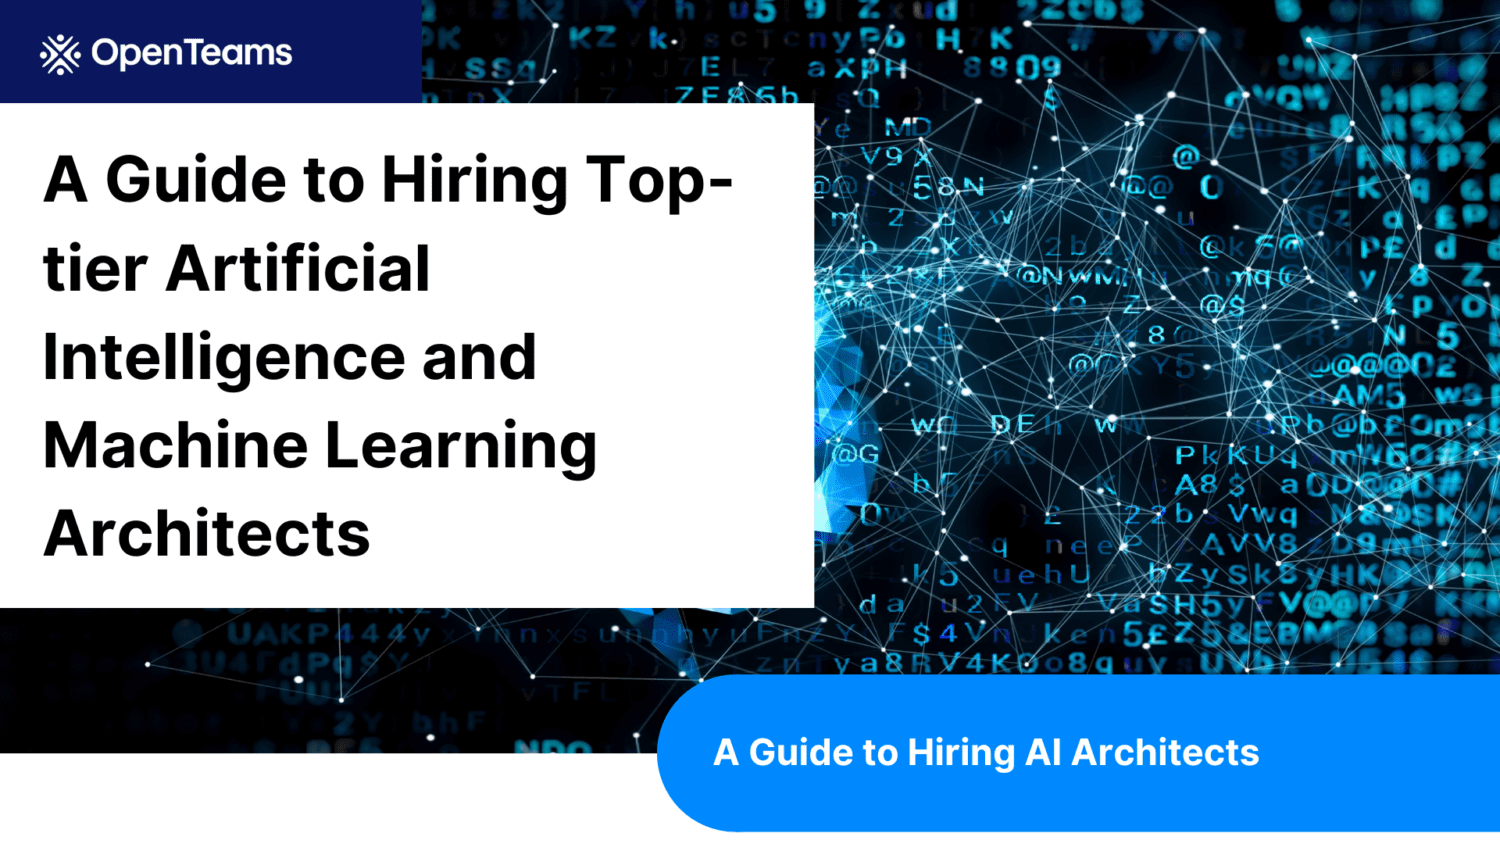 A Guide to Hiring Top-tier Artificial Intelligence and Machine Learning Architects